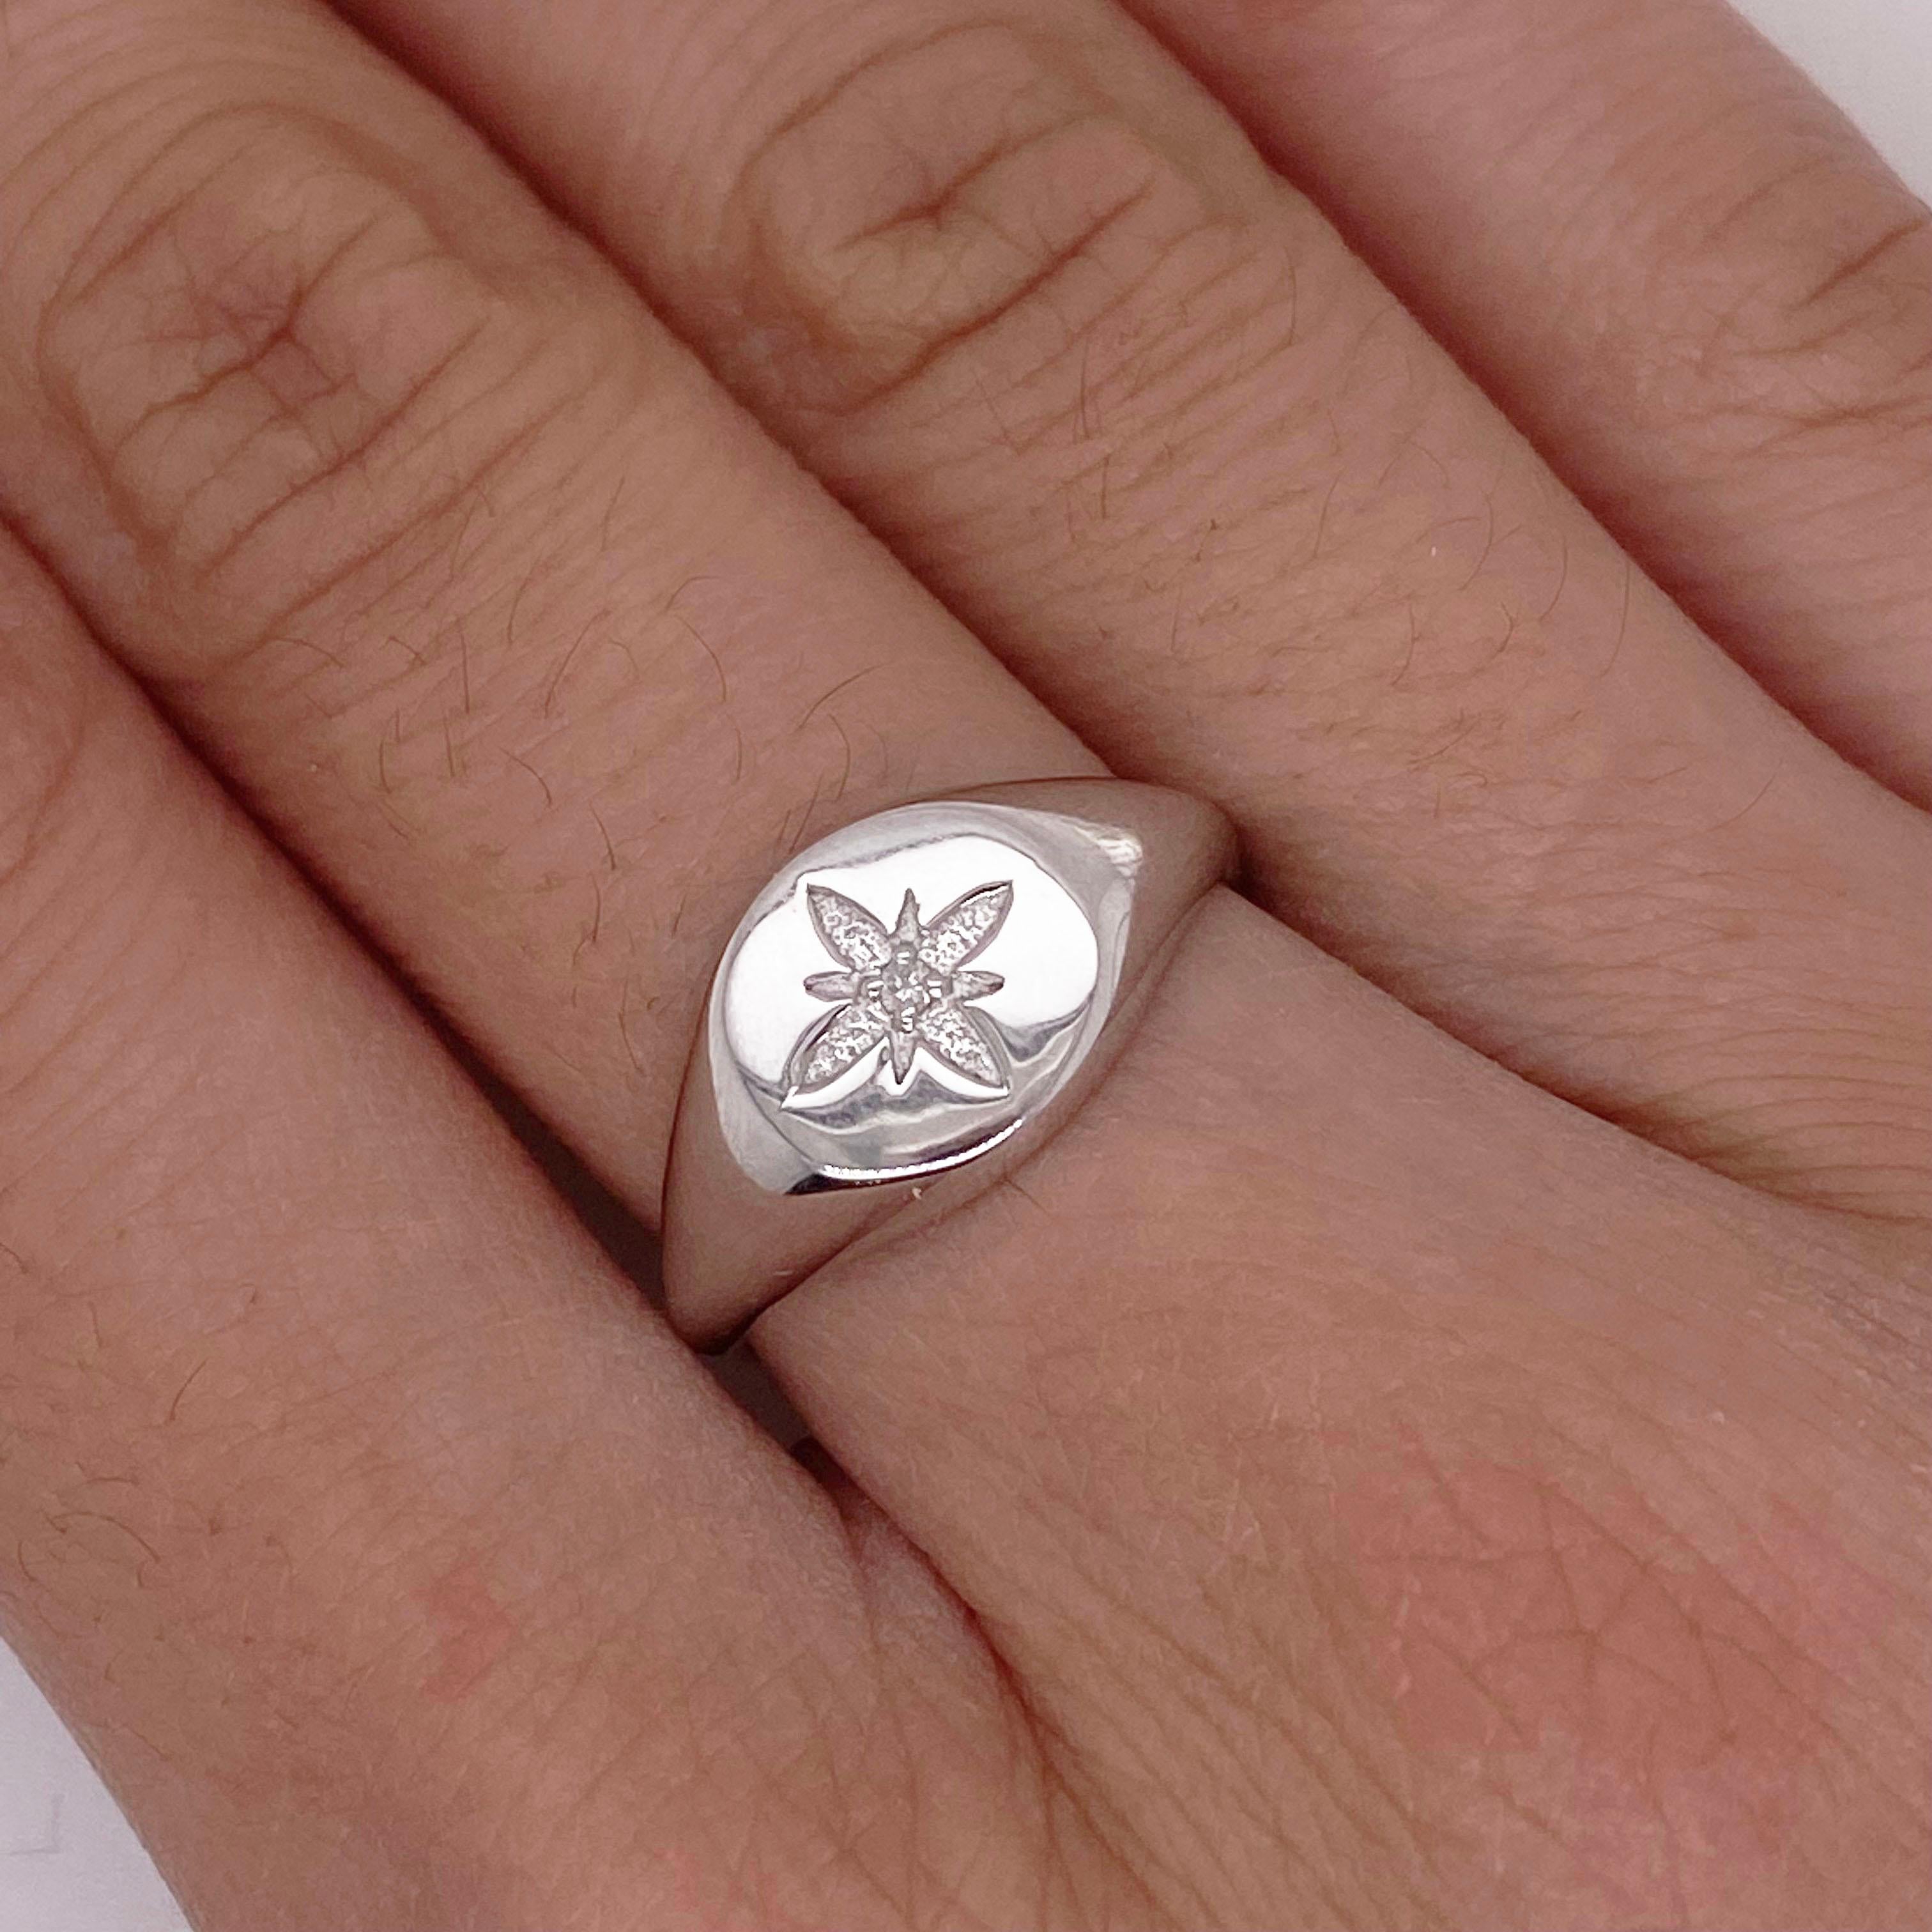 For Sale:  Snowflake Signet Ring, Flower Signet Sterling Silver Ring 4